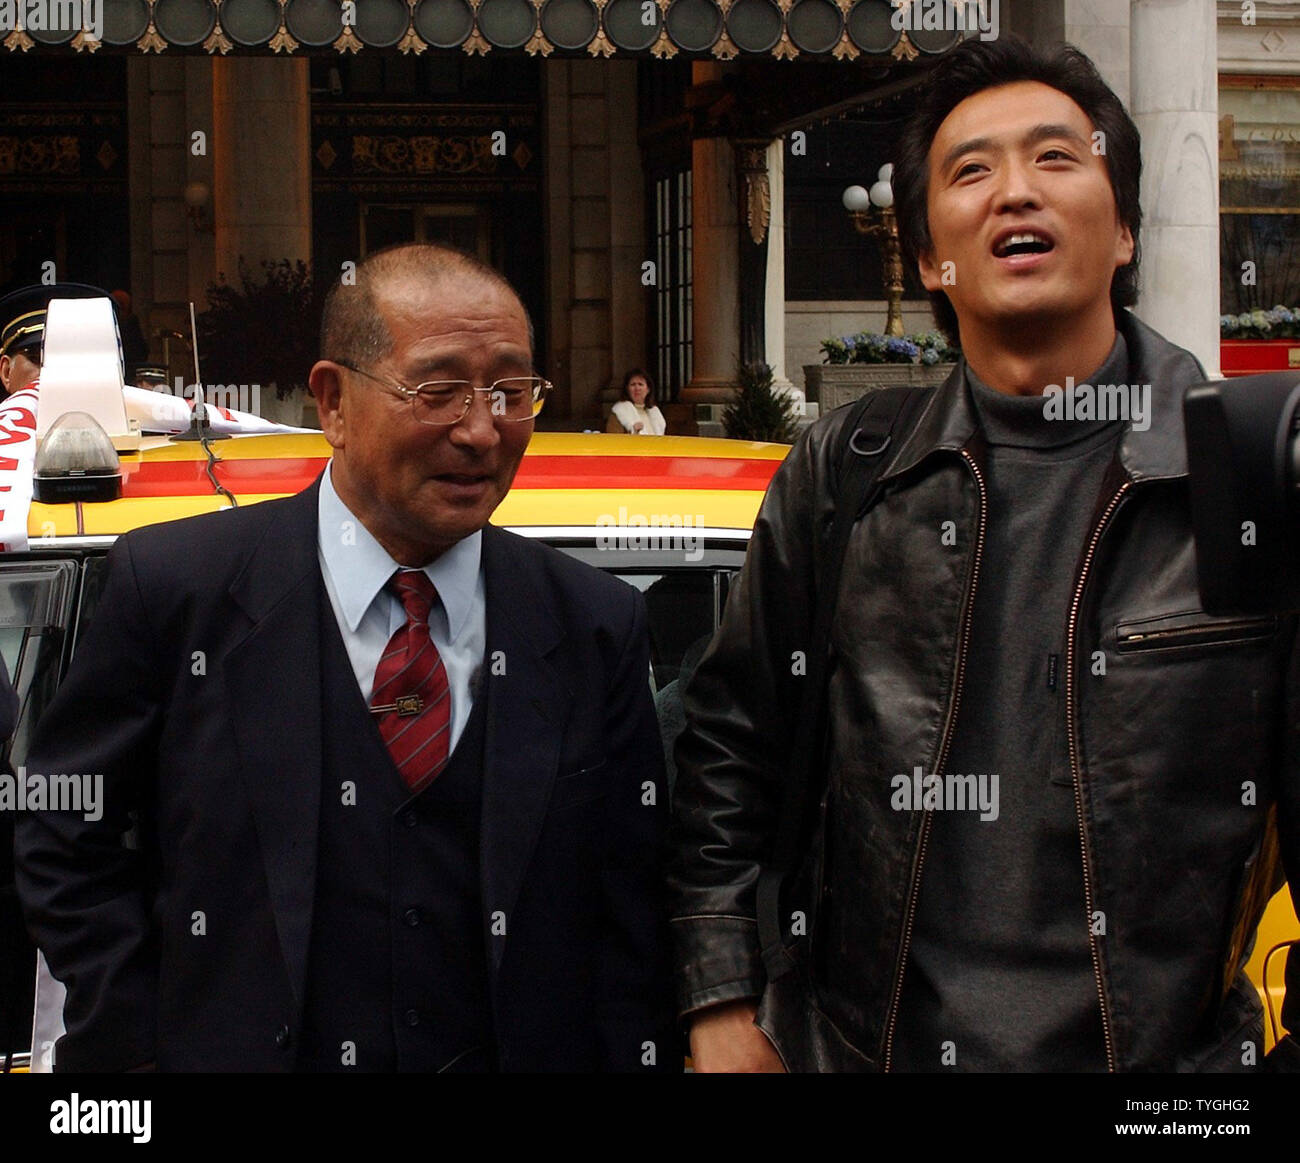 Japanese cab driver Tsyuyoshi Sakuma (left) and actor Gitan Otsuru (guest passenger) celebrate after crossing the finish line outside the Plaza Hotel in New York City on April 2, 2004 after driving from Ushuaia, Argentina on Dec. 23, 2003 to the United States.  (UPI/Ezio Petersen) Stock Photo